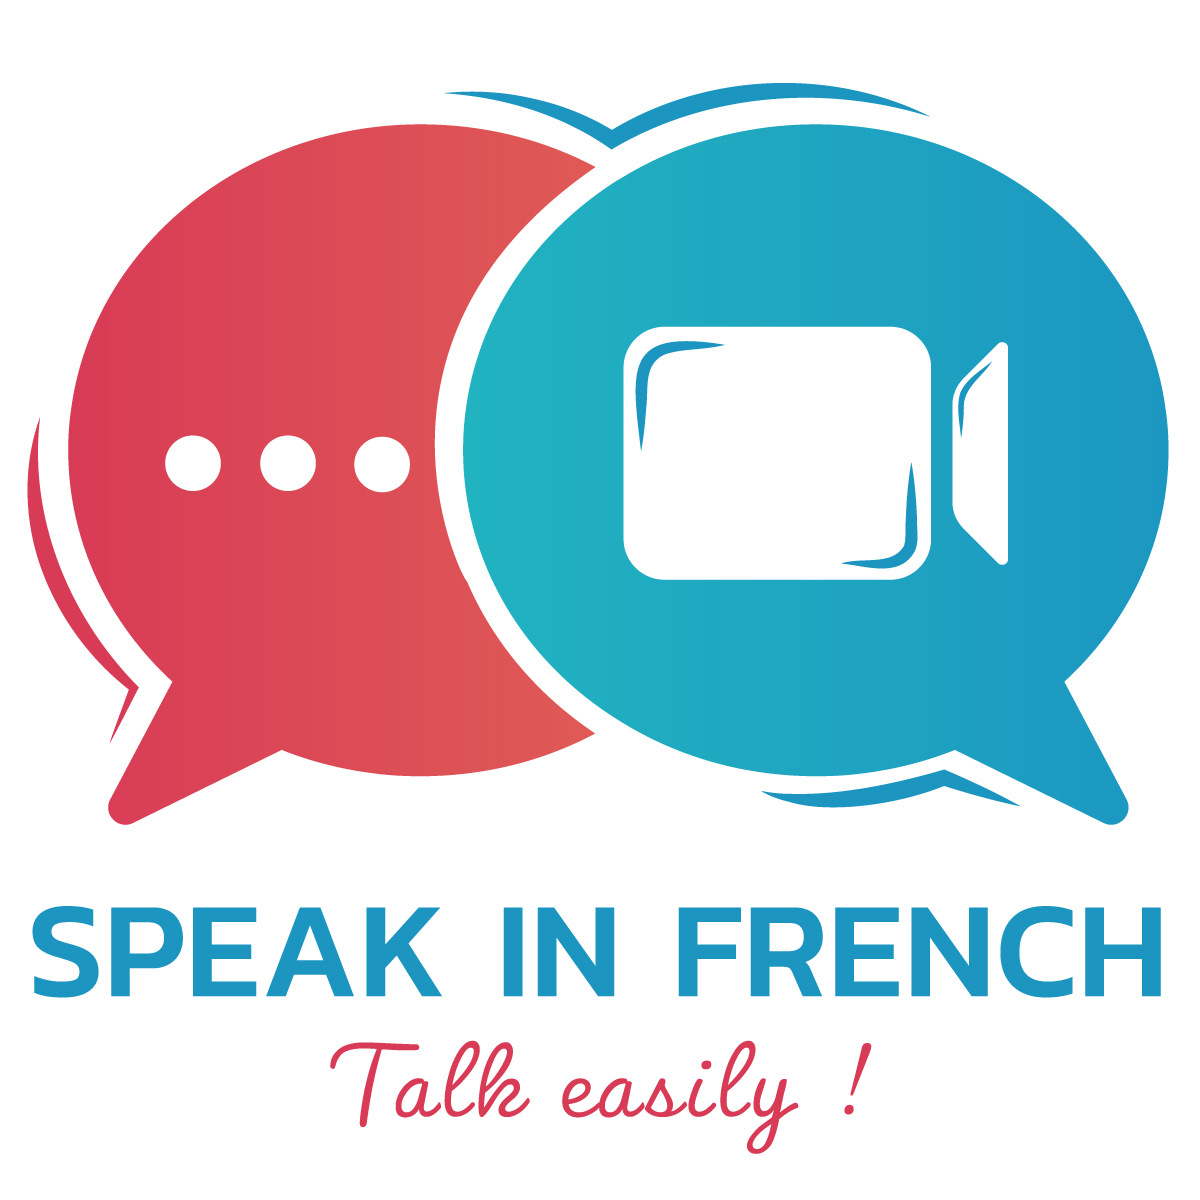 learn french,french cours,stays in france,french online,talk easily in french,speak french,speak in french,conversation in French,french course online,french teacher,best french teacher,french at home,start talking,jerome sintes,home-2,first class is free